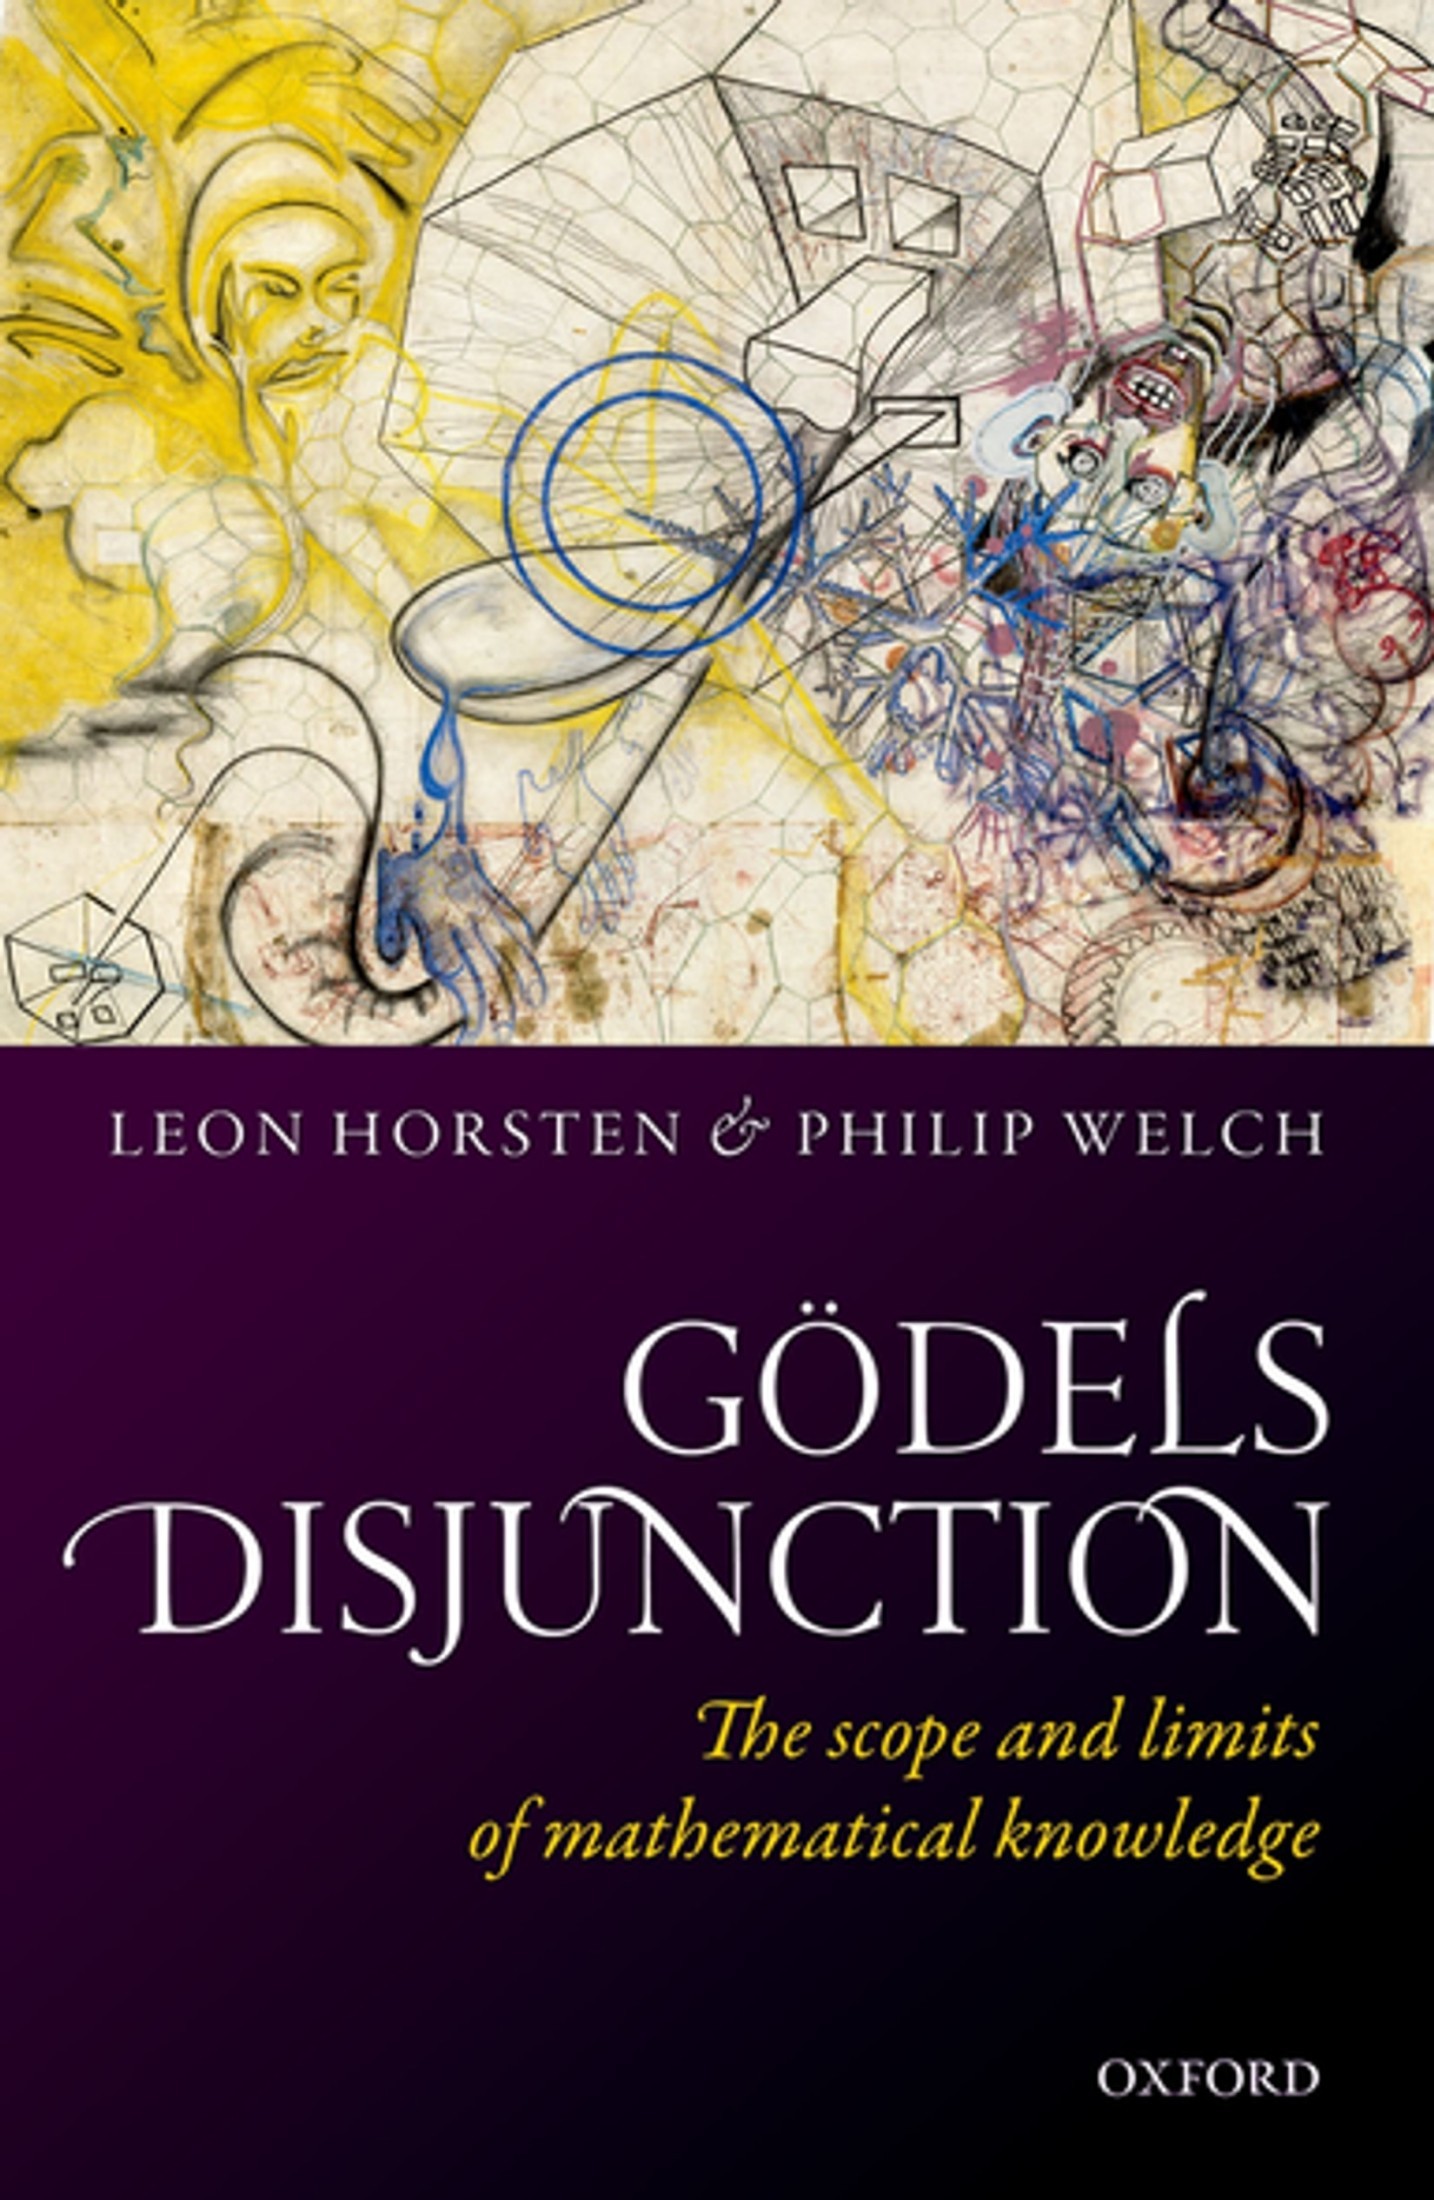 Godel's Disjunction: The Scope and Limits of Mathematical Knowledge